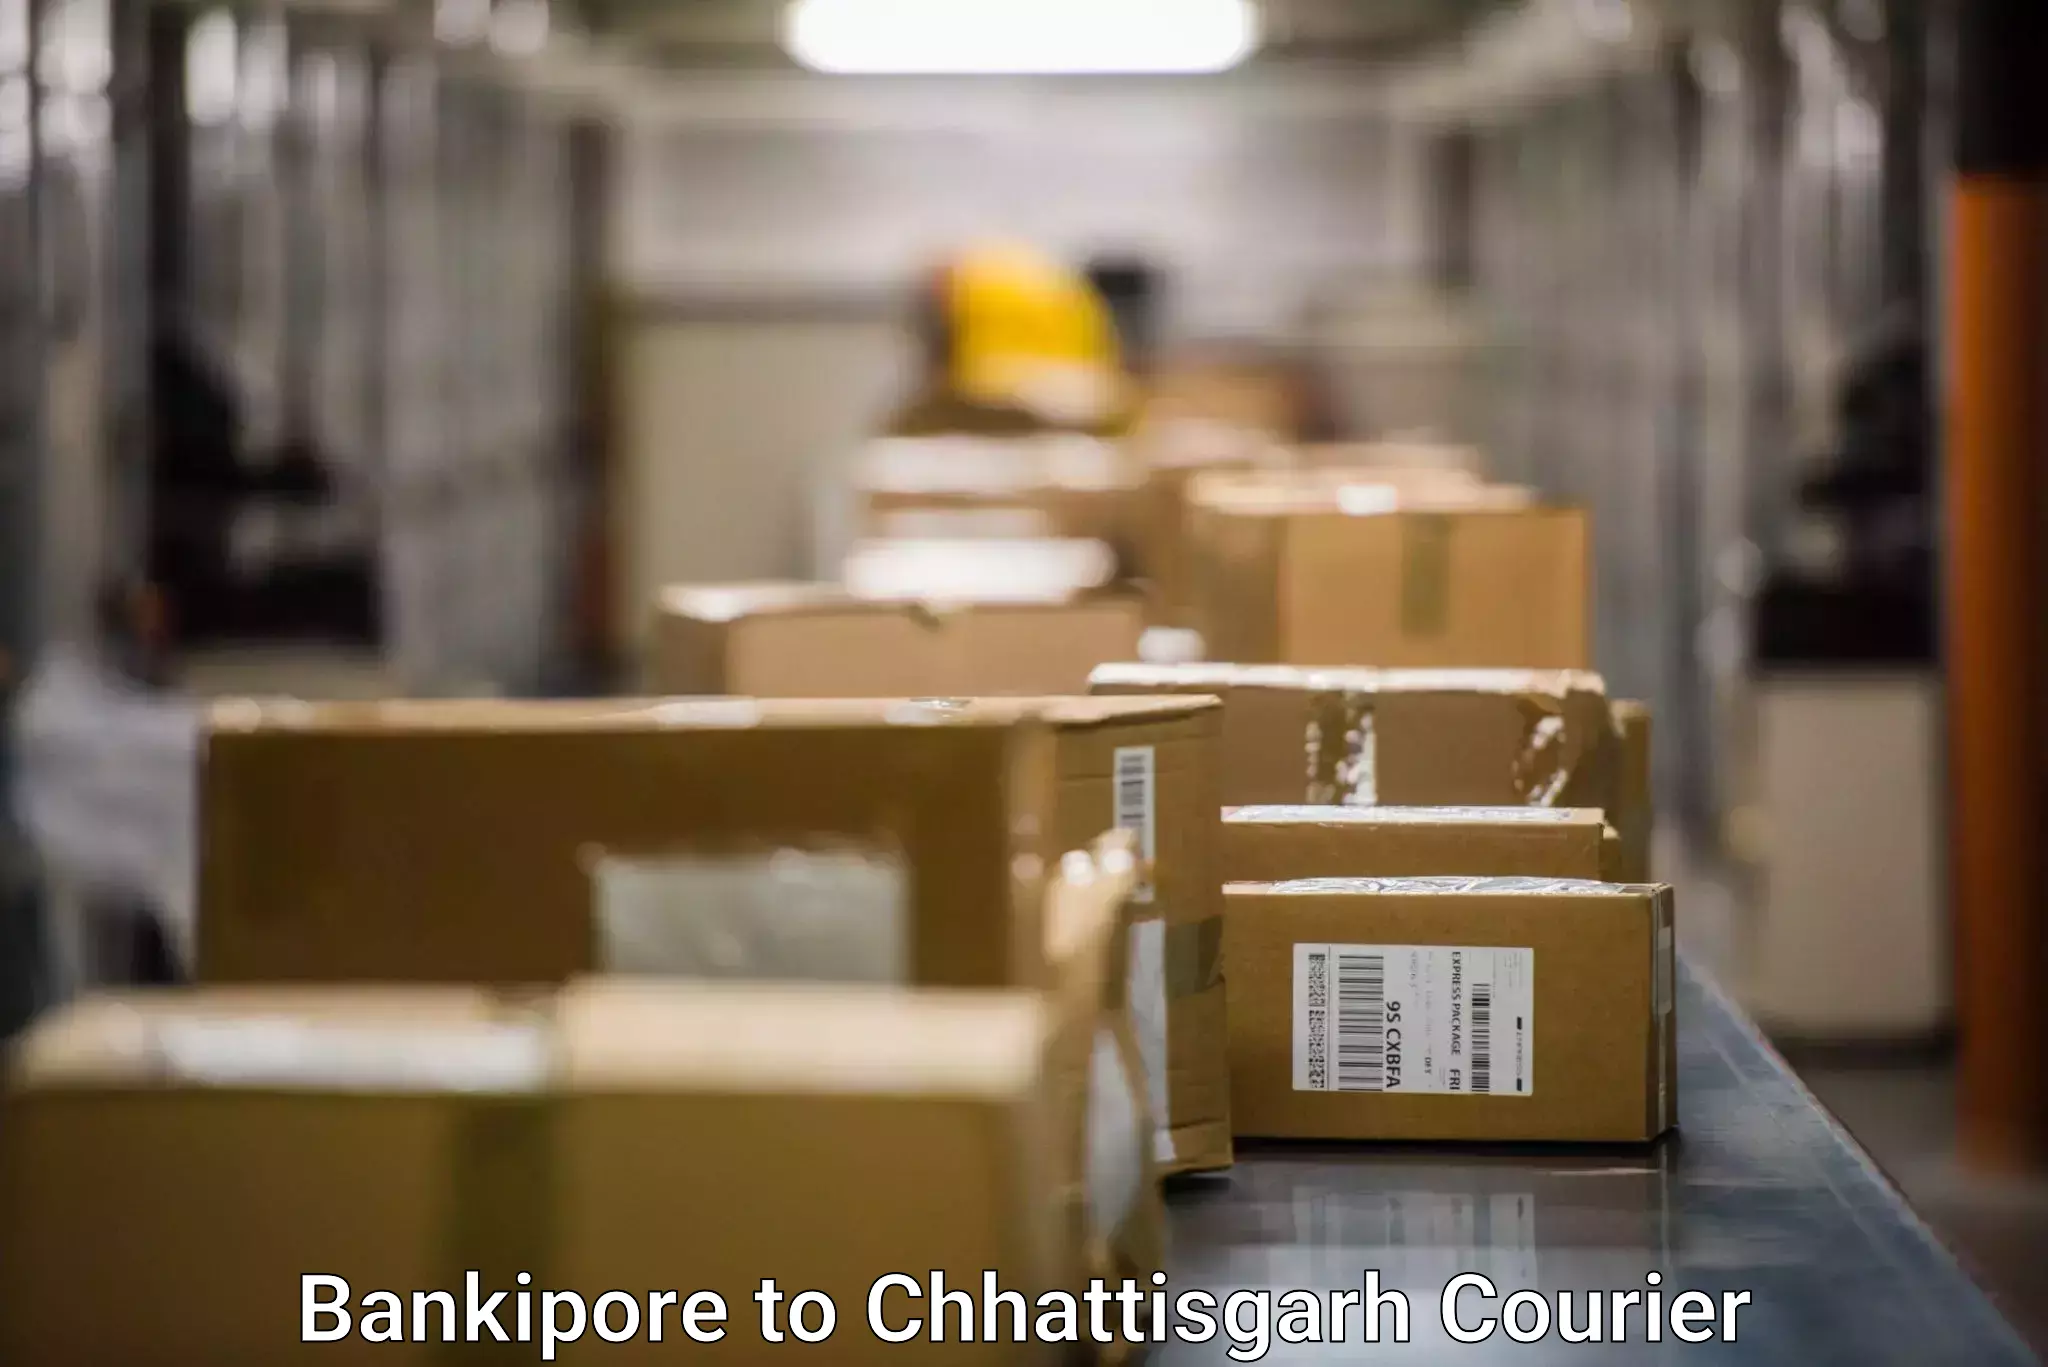 Efficient parcel tracking in Bankipore to Patna Chhattisgarh